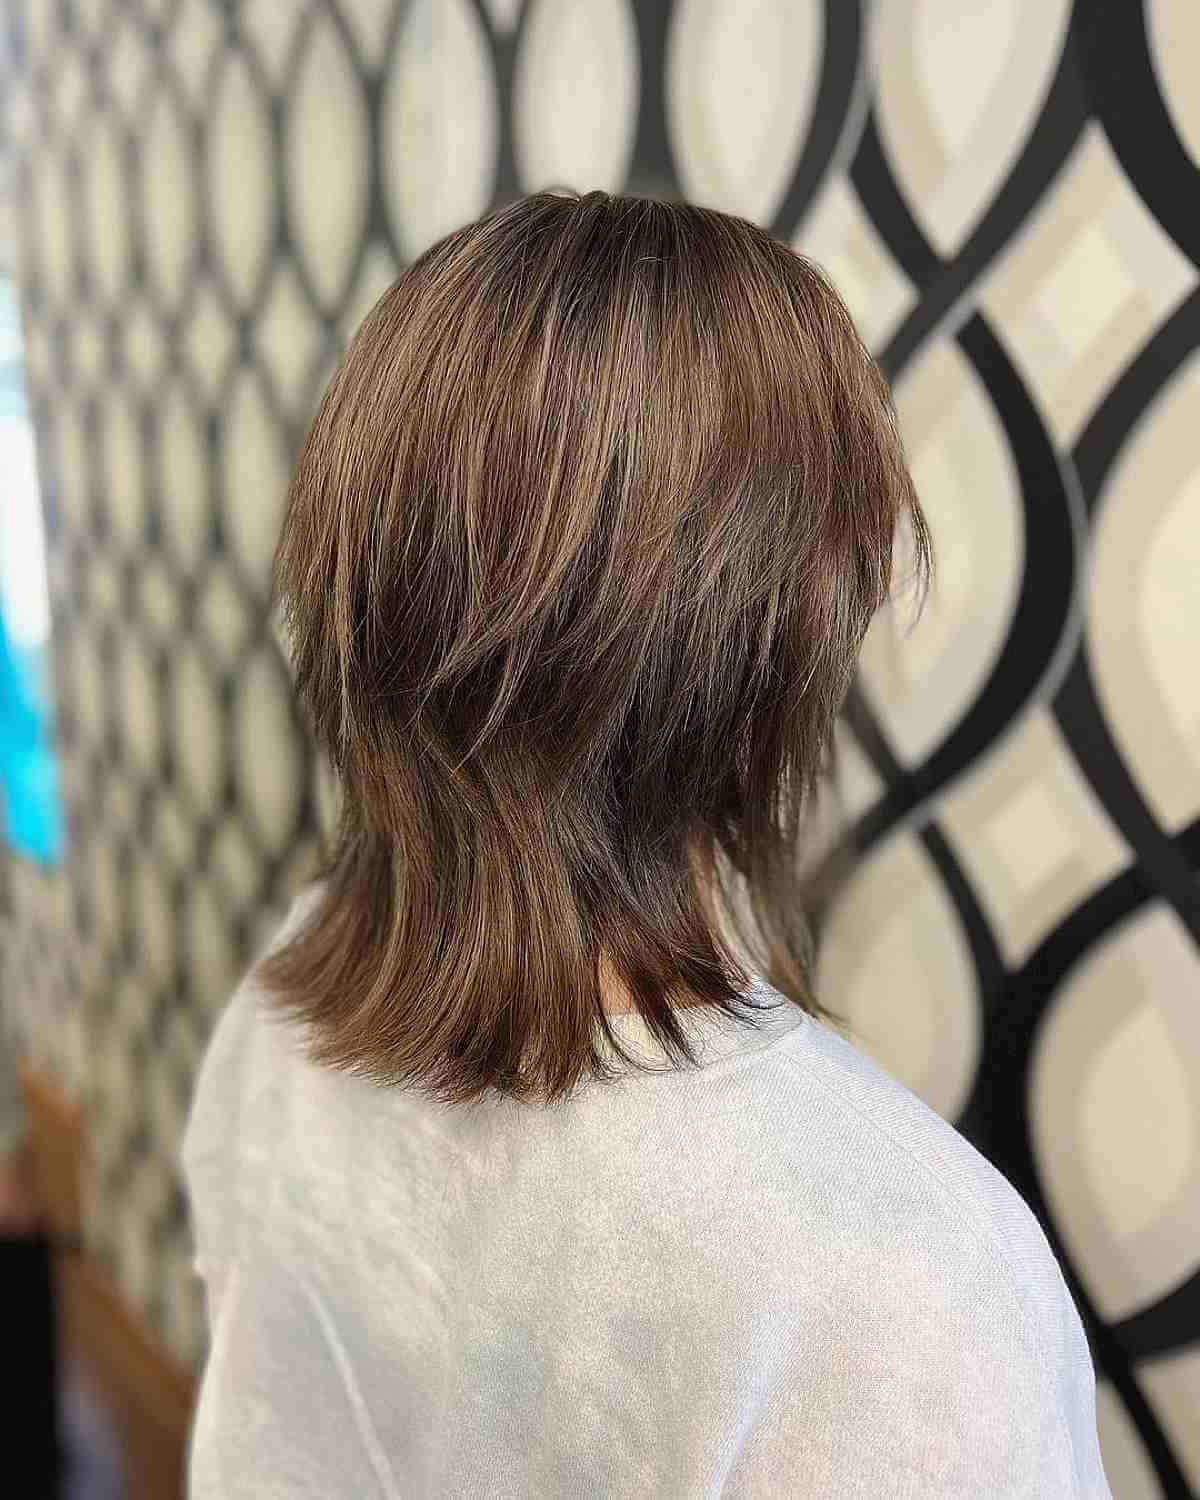 Short Edgy Wolf Cut with Medium Jagged Layers